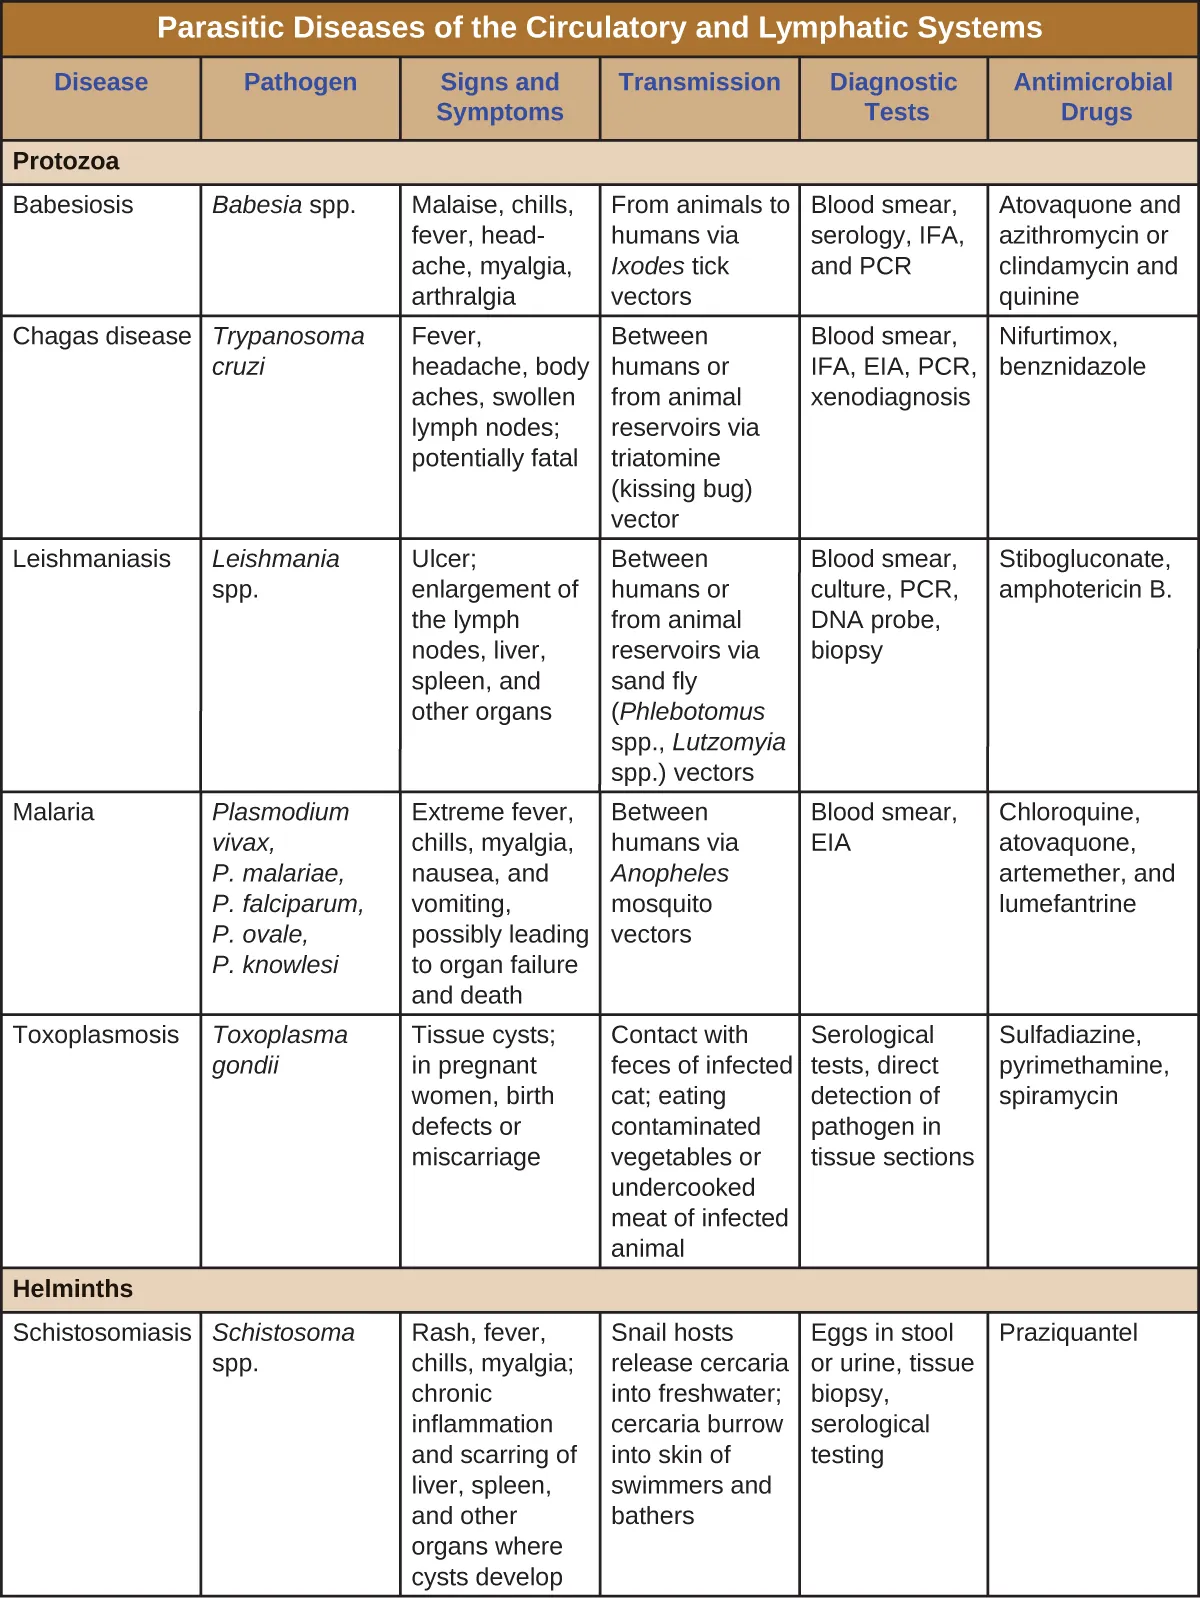 Table titled: Parasitic Diseases of the Circulatory and Lymphatic Systems. Columns: Disease, Pathogen, Signs and Symptoms, Transmission, Diagnostic Tests, Antimicrobial Drugs, Protozoa. Babesiosis; Babesia spp.; Malaise, chills, fever, headache, myalgia, arthralgia; From animals to humans via Ixodes tick vectors; Blood smear, serology, IFA, and PCR; Atovaquone and azithromycin or clindamycin and quinine. Chagas disease ; Trypanosoma cruzi; Fever, headache, body aches, swollen lymph nodes; potentially fatal; Between humans or from animal reservoirs via triatomine (kissing bug) vector; Blood smear, IFA, EIA, PCR, xenodiagnoses; Nifurtimox, benznidazole. Leishmaniasis Leishmania spp.; Ulcer; enlargement of the lymph nodes, liver, spleen, and other organs; Between humans or from animal reservoirs via sand fly (Phlebotomus spp., Lutzomyia spp.) vectors; Blood smear, culture, PCR, DNA probe, biopsy; Stibogluconate, amphotericin B, miltefosine. Malaria; Plasmodium vivax, P. malariae, P. falciparum, P. ovale, P. knowlesi; Extreme fever, chills, myalgia, nausea, and vomiting, possibly leading to organ failure and death; Between humans via Anopheles mosquito vectors; Blood smear, EIA; Chloroquine, atovaquone, artemether, and lumefantrine. Toxoplasmosis Toxoplasma gondii; Tissue cysts; in pregnant women, birth defects or miscarriage; Contact with feces of infected cat; eating contaminated vegetables or undercooked meat of infected animal; Serological tests, direct detection of pathogen in tissue sections; Sulfadiazine, pyrimethamine, spiramycin; Helminths. Schistosomiasis; Schistosoma spp.; Rash, fever, chills, myalgia; chronic inflammation and scarring of liver, spleen, and other organs where cysts develop; Snail hosts release cercaria into freshwater; cercaria burrow into skin of swimmers and bathers; Eggs in stool or urine, tissue biopsy, serological testing; Praziquantel..